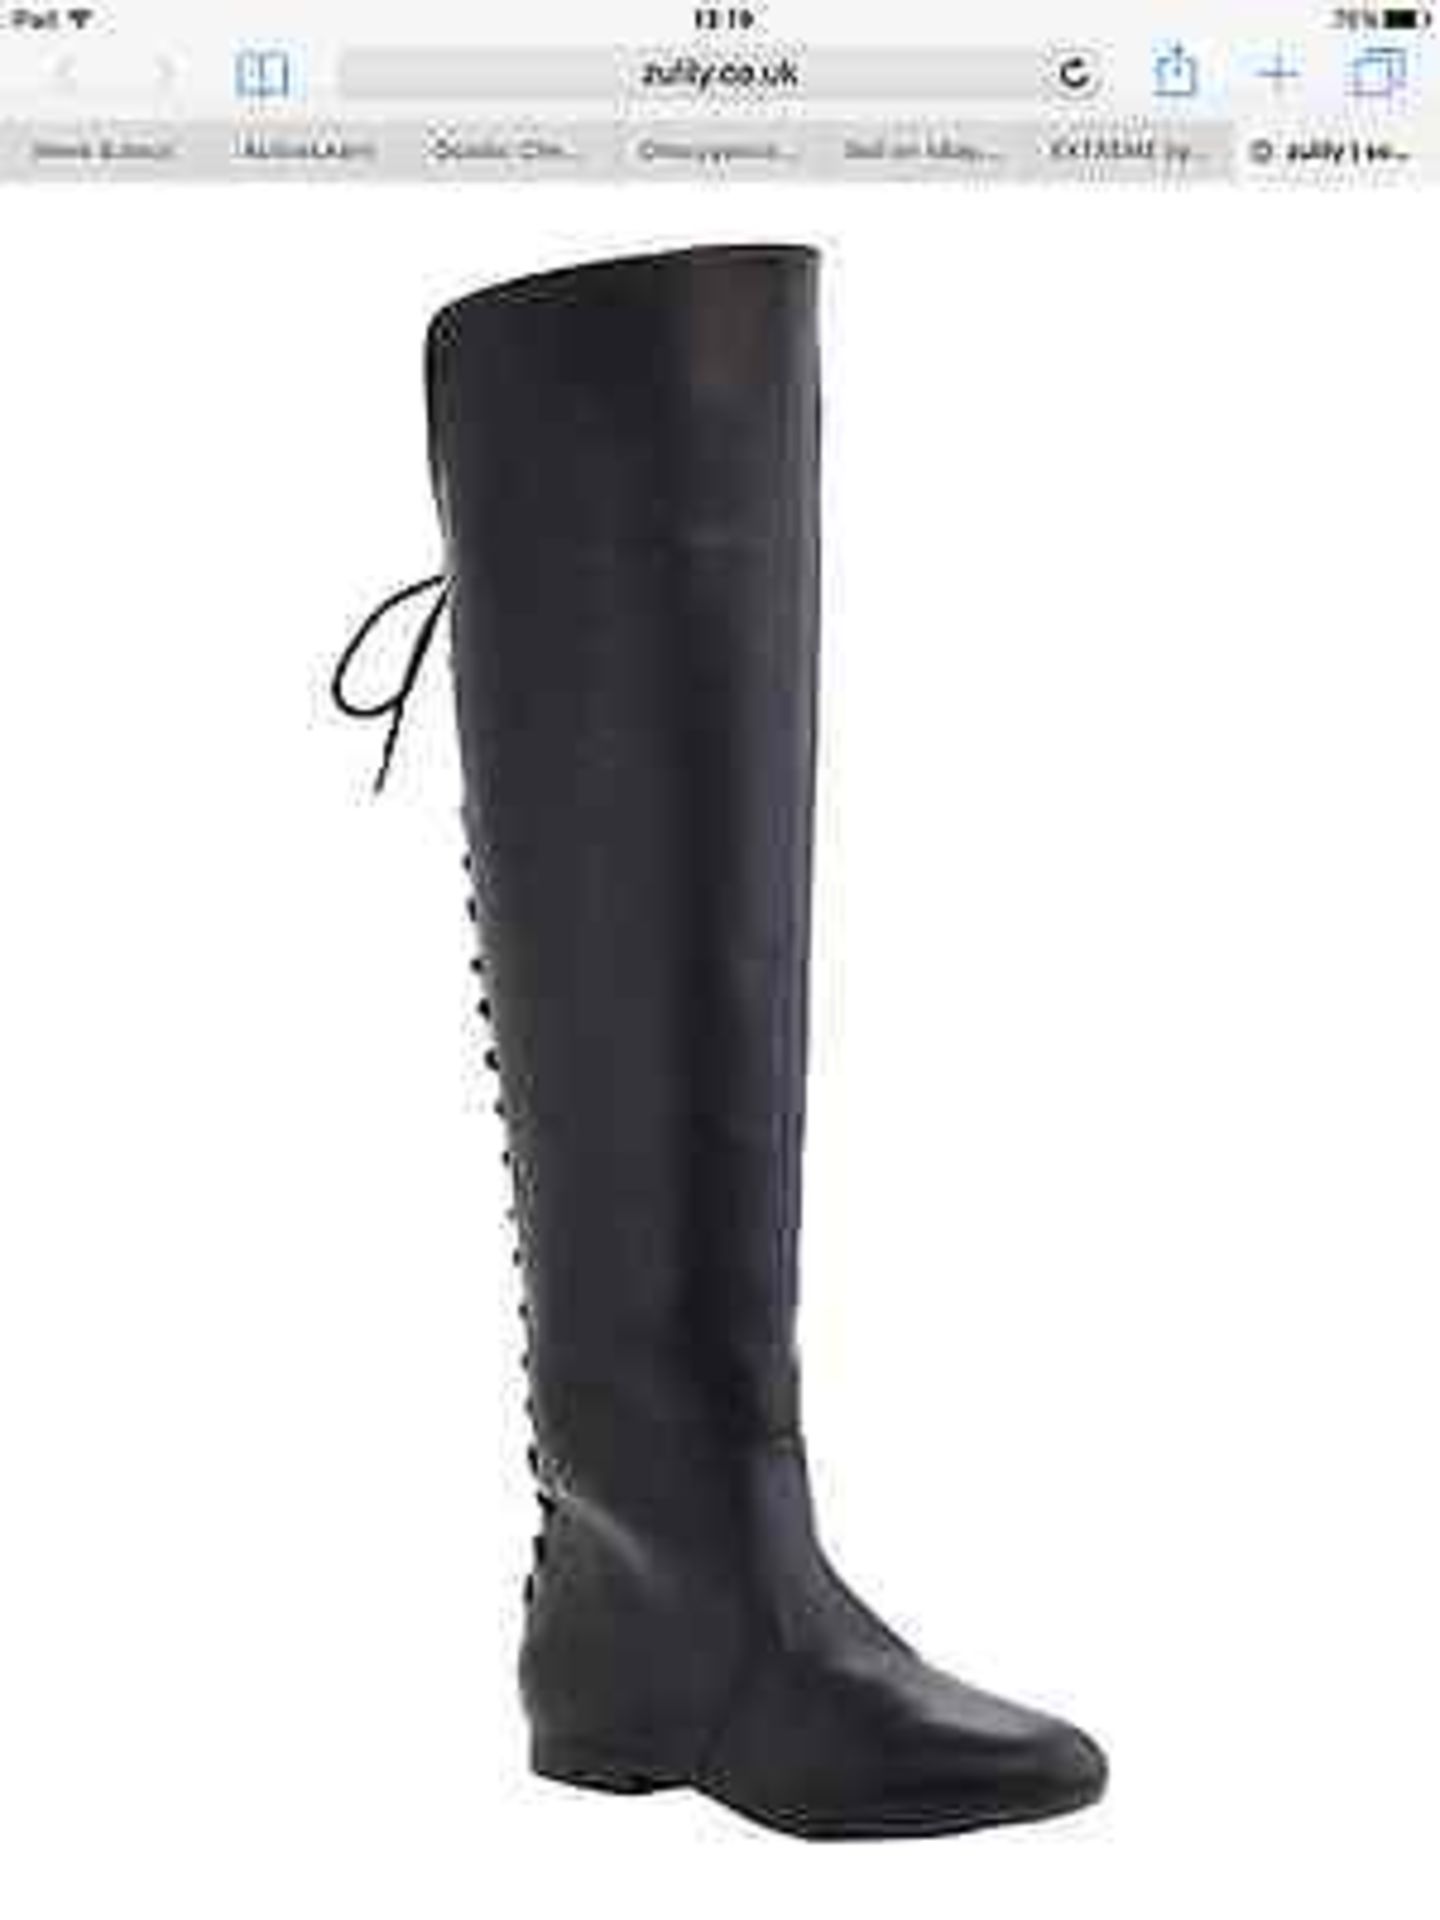 Extreme by Eddie Marc Black Over the Knee Geriatric Boot, Size 6, RRP £127.99 (New with box)